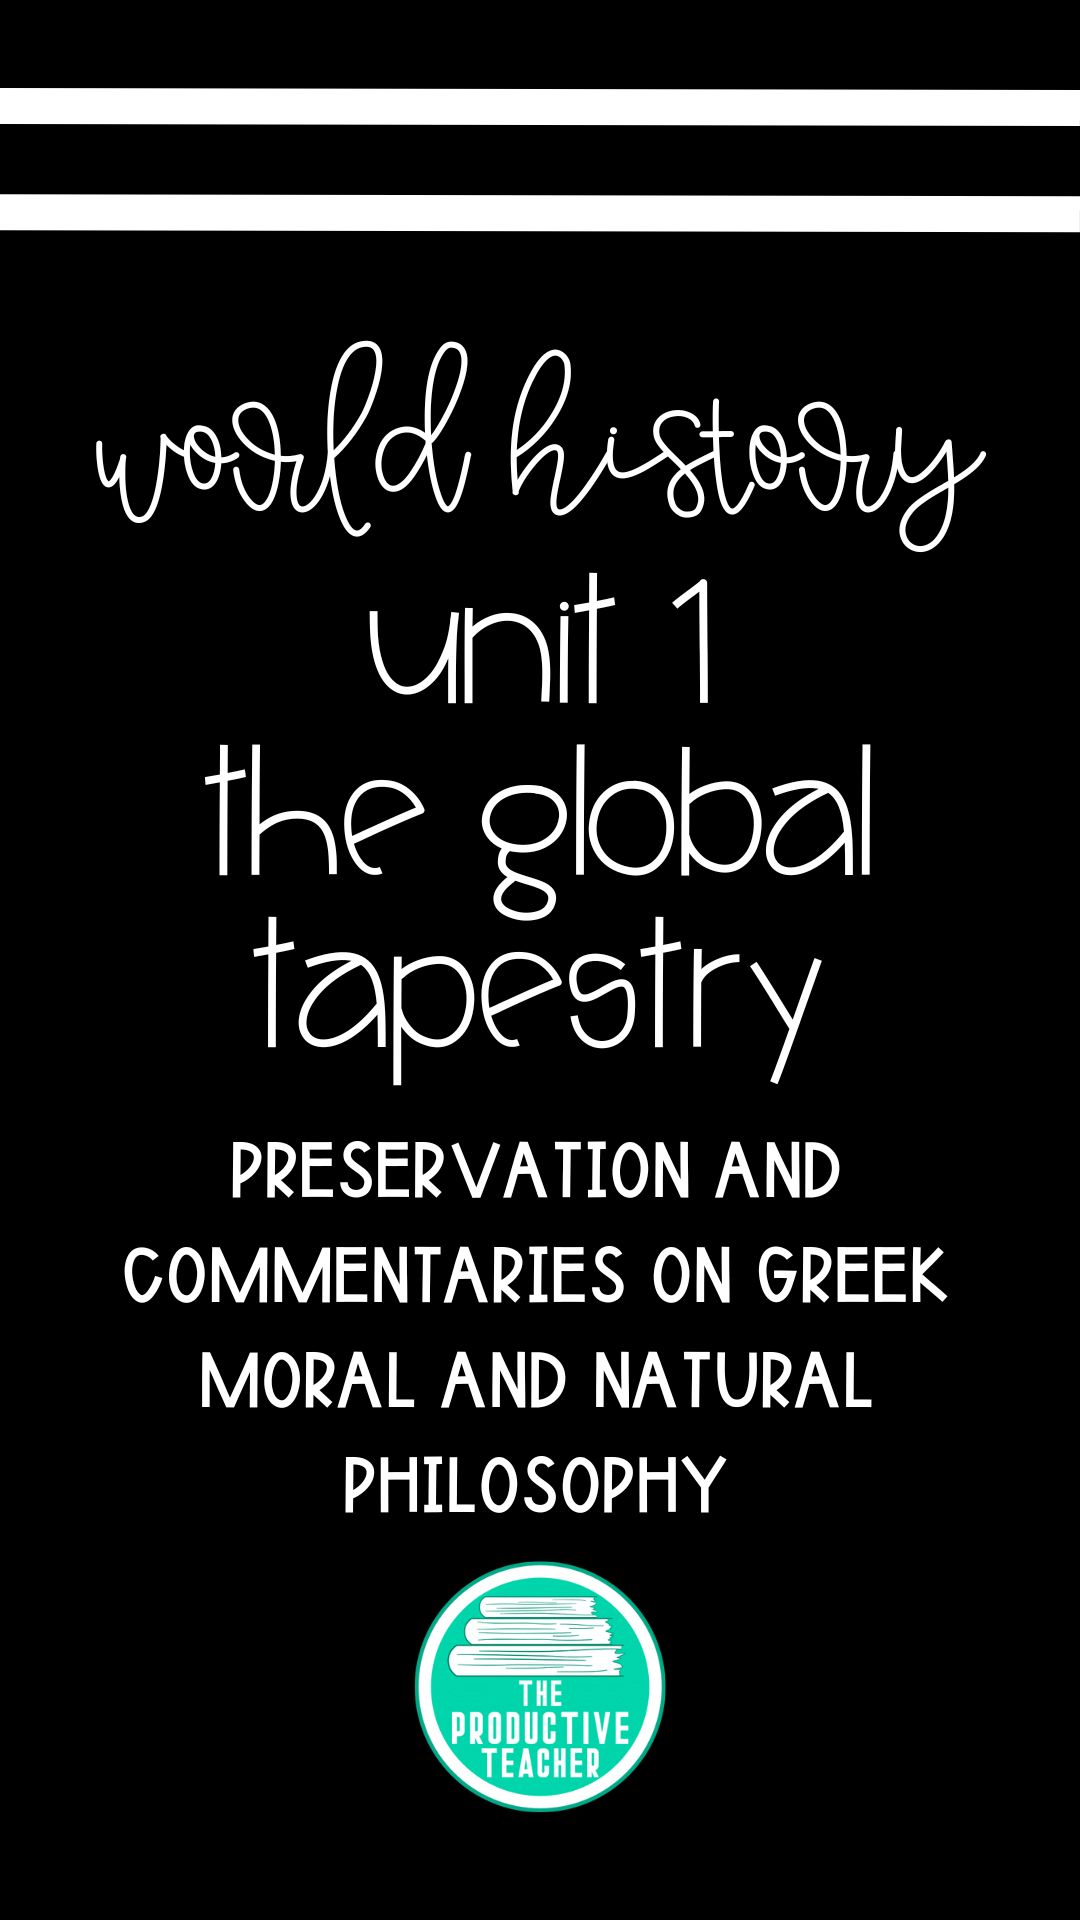 Preservation and Commentaries on Greek Moral and Natural Philosophy